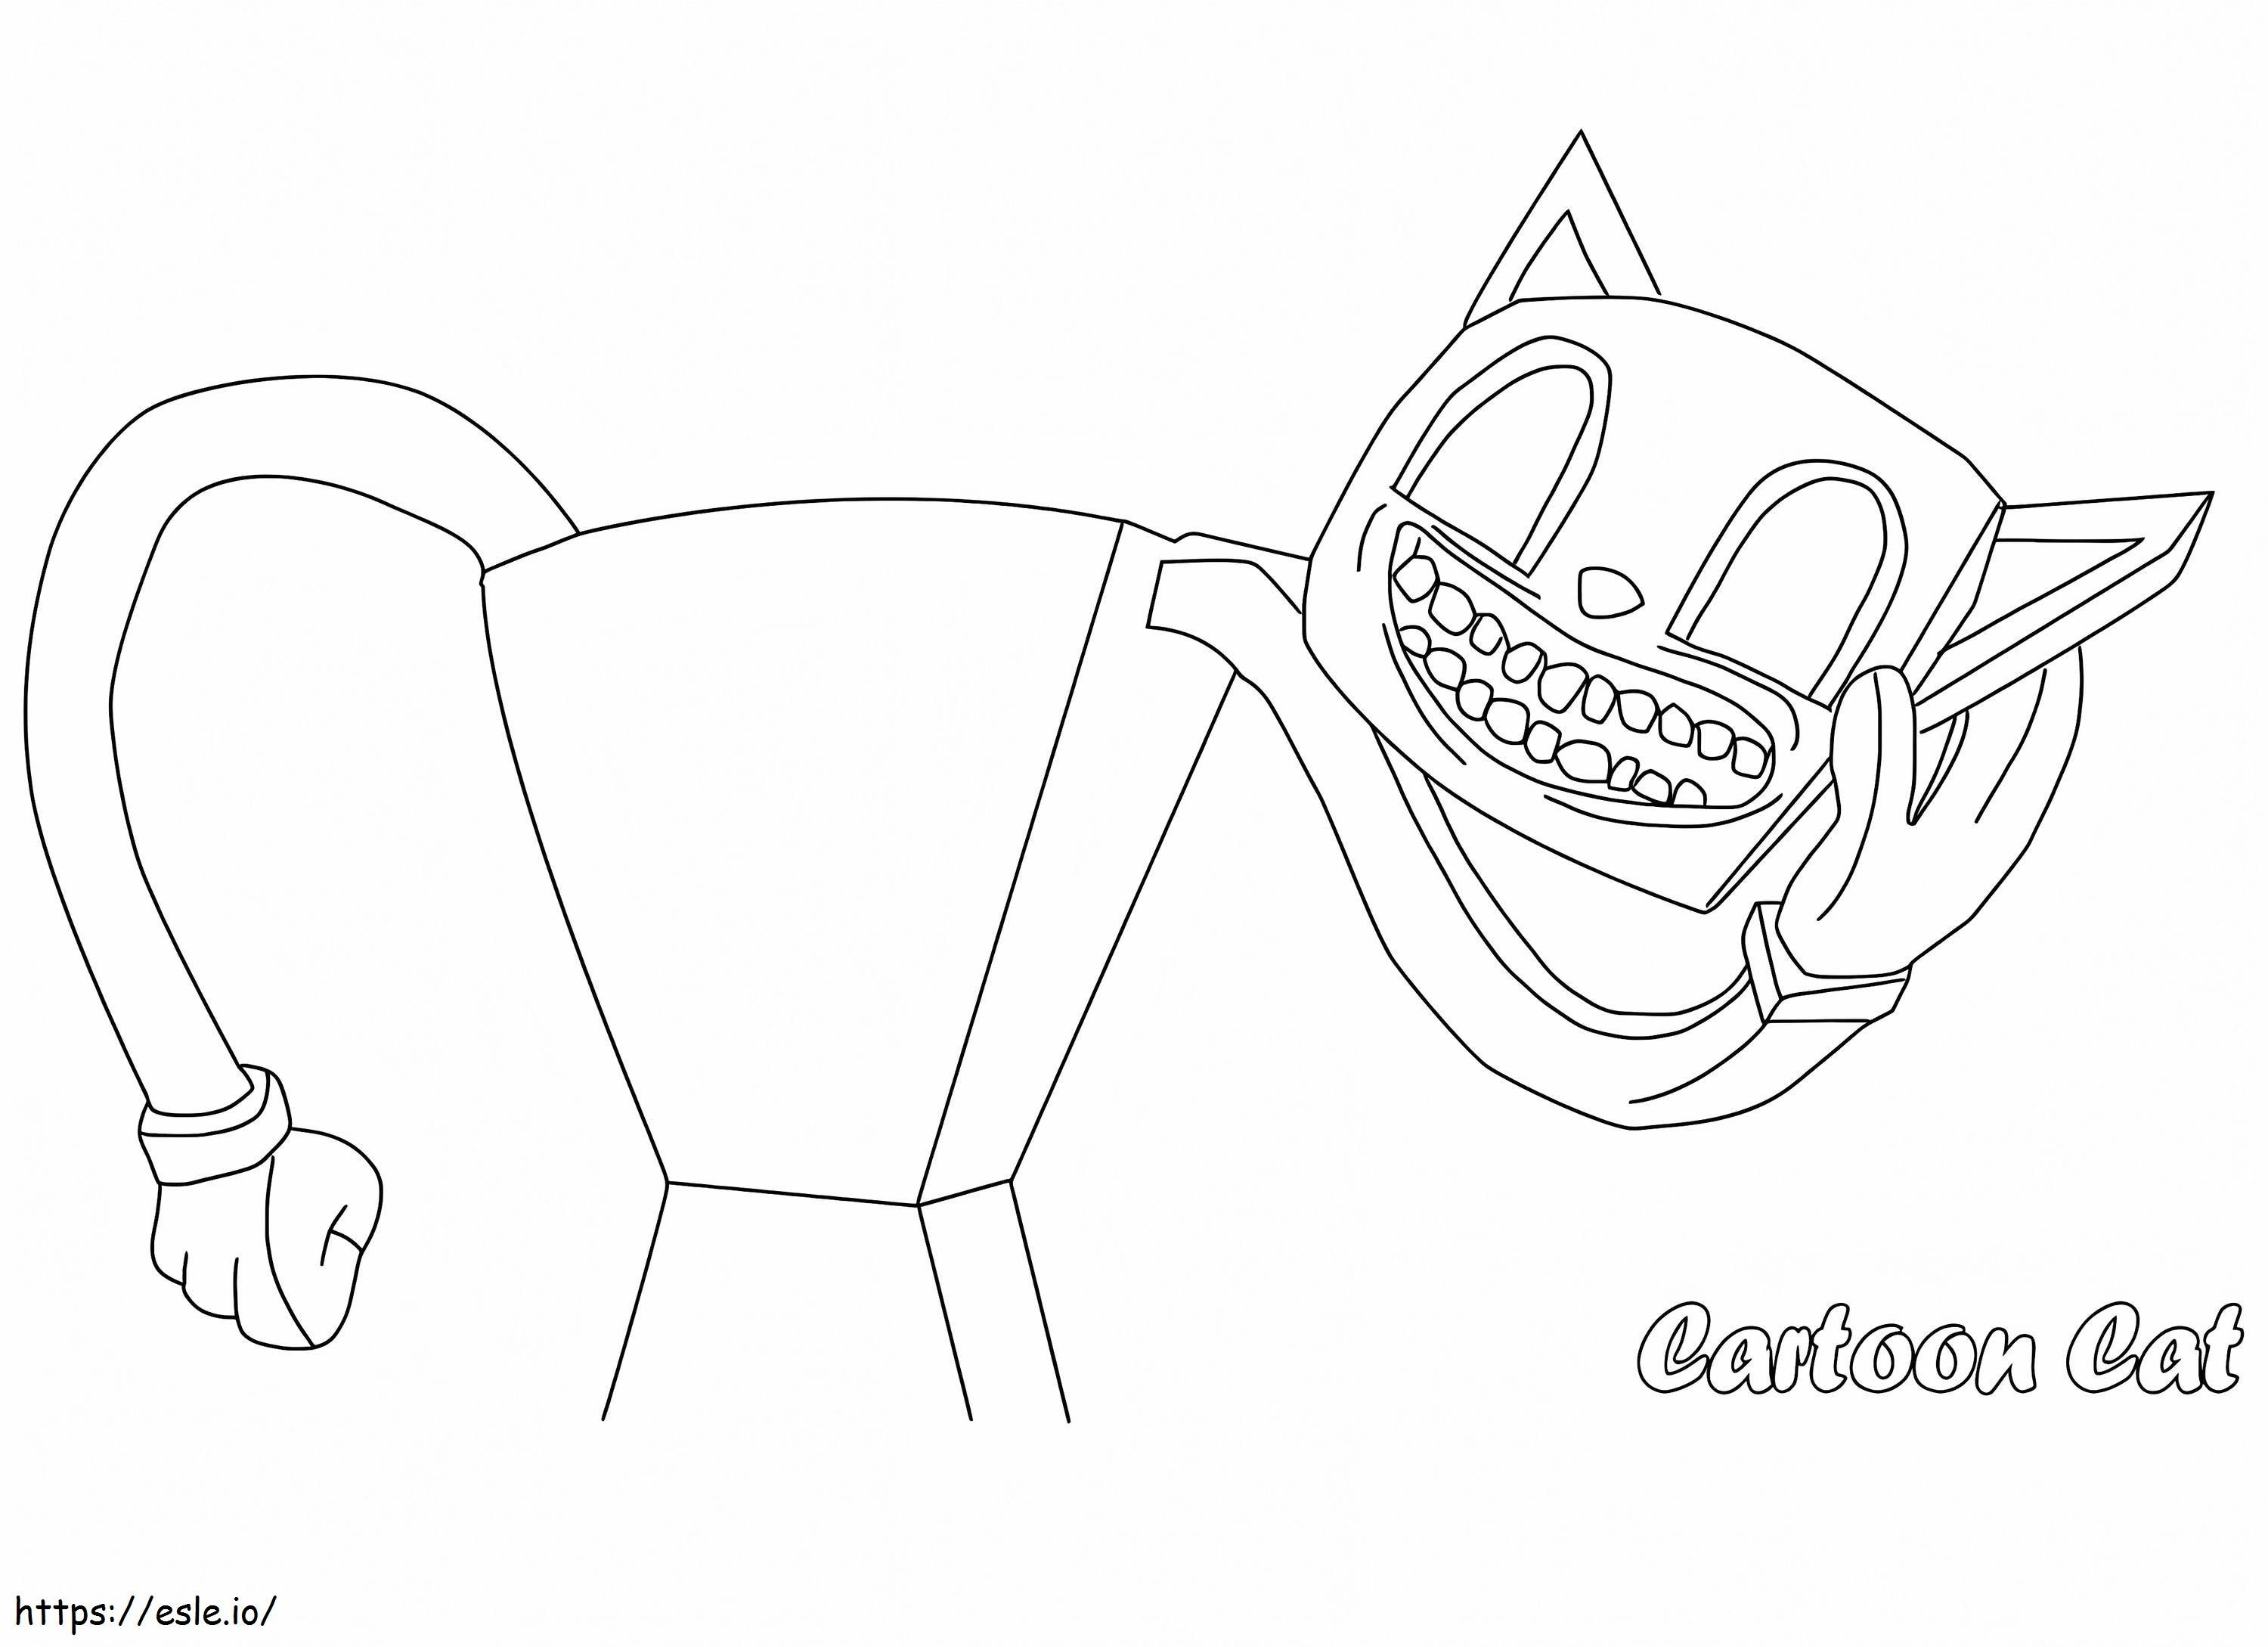 Printable Cartoon Cat 1 coloring page